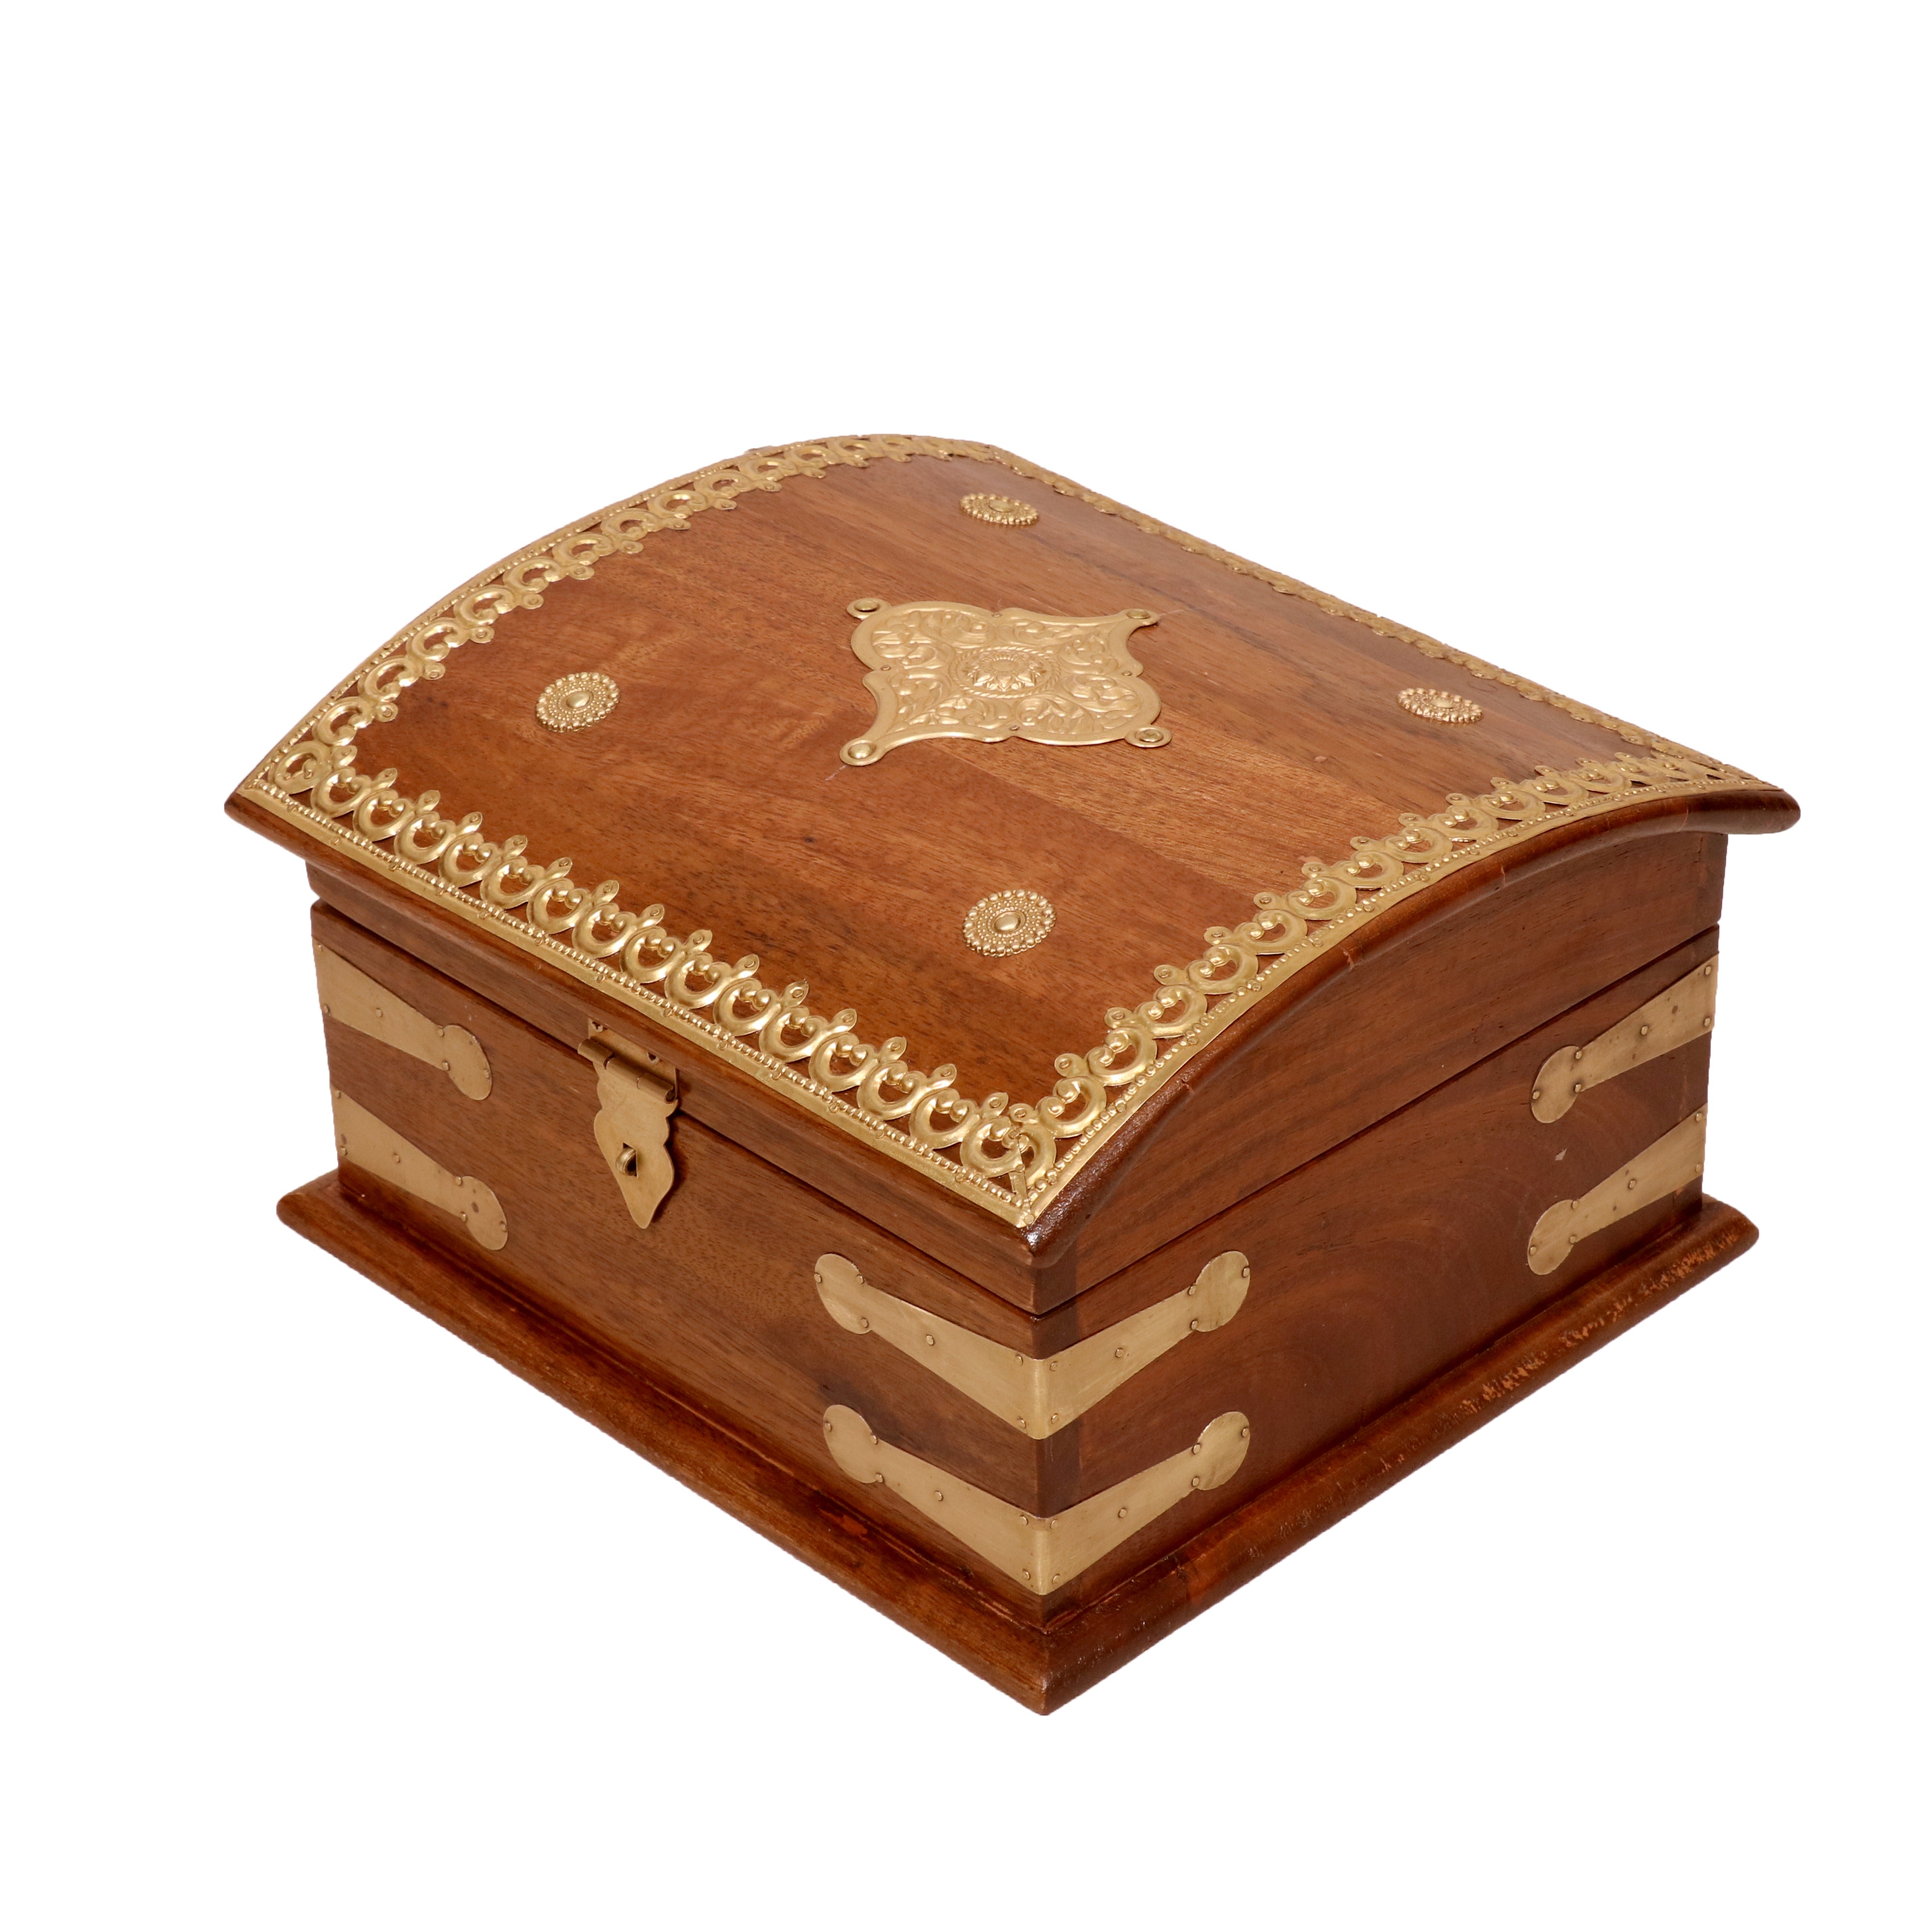 Wooden Curved Boxes Large (12 x 11 x 7 Inch) Wooden Box